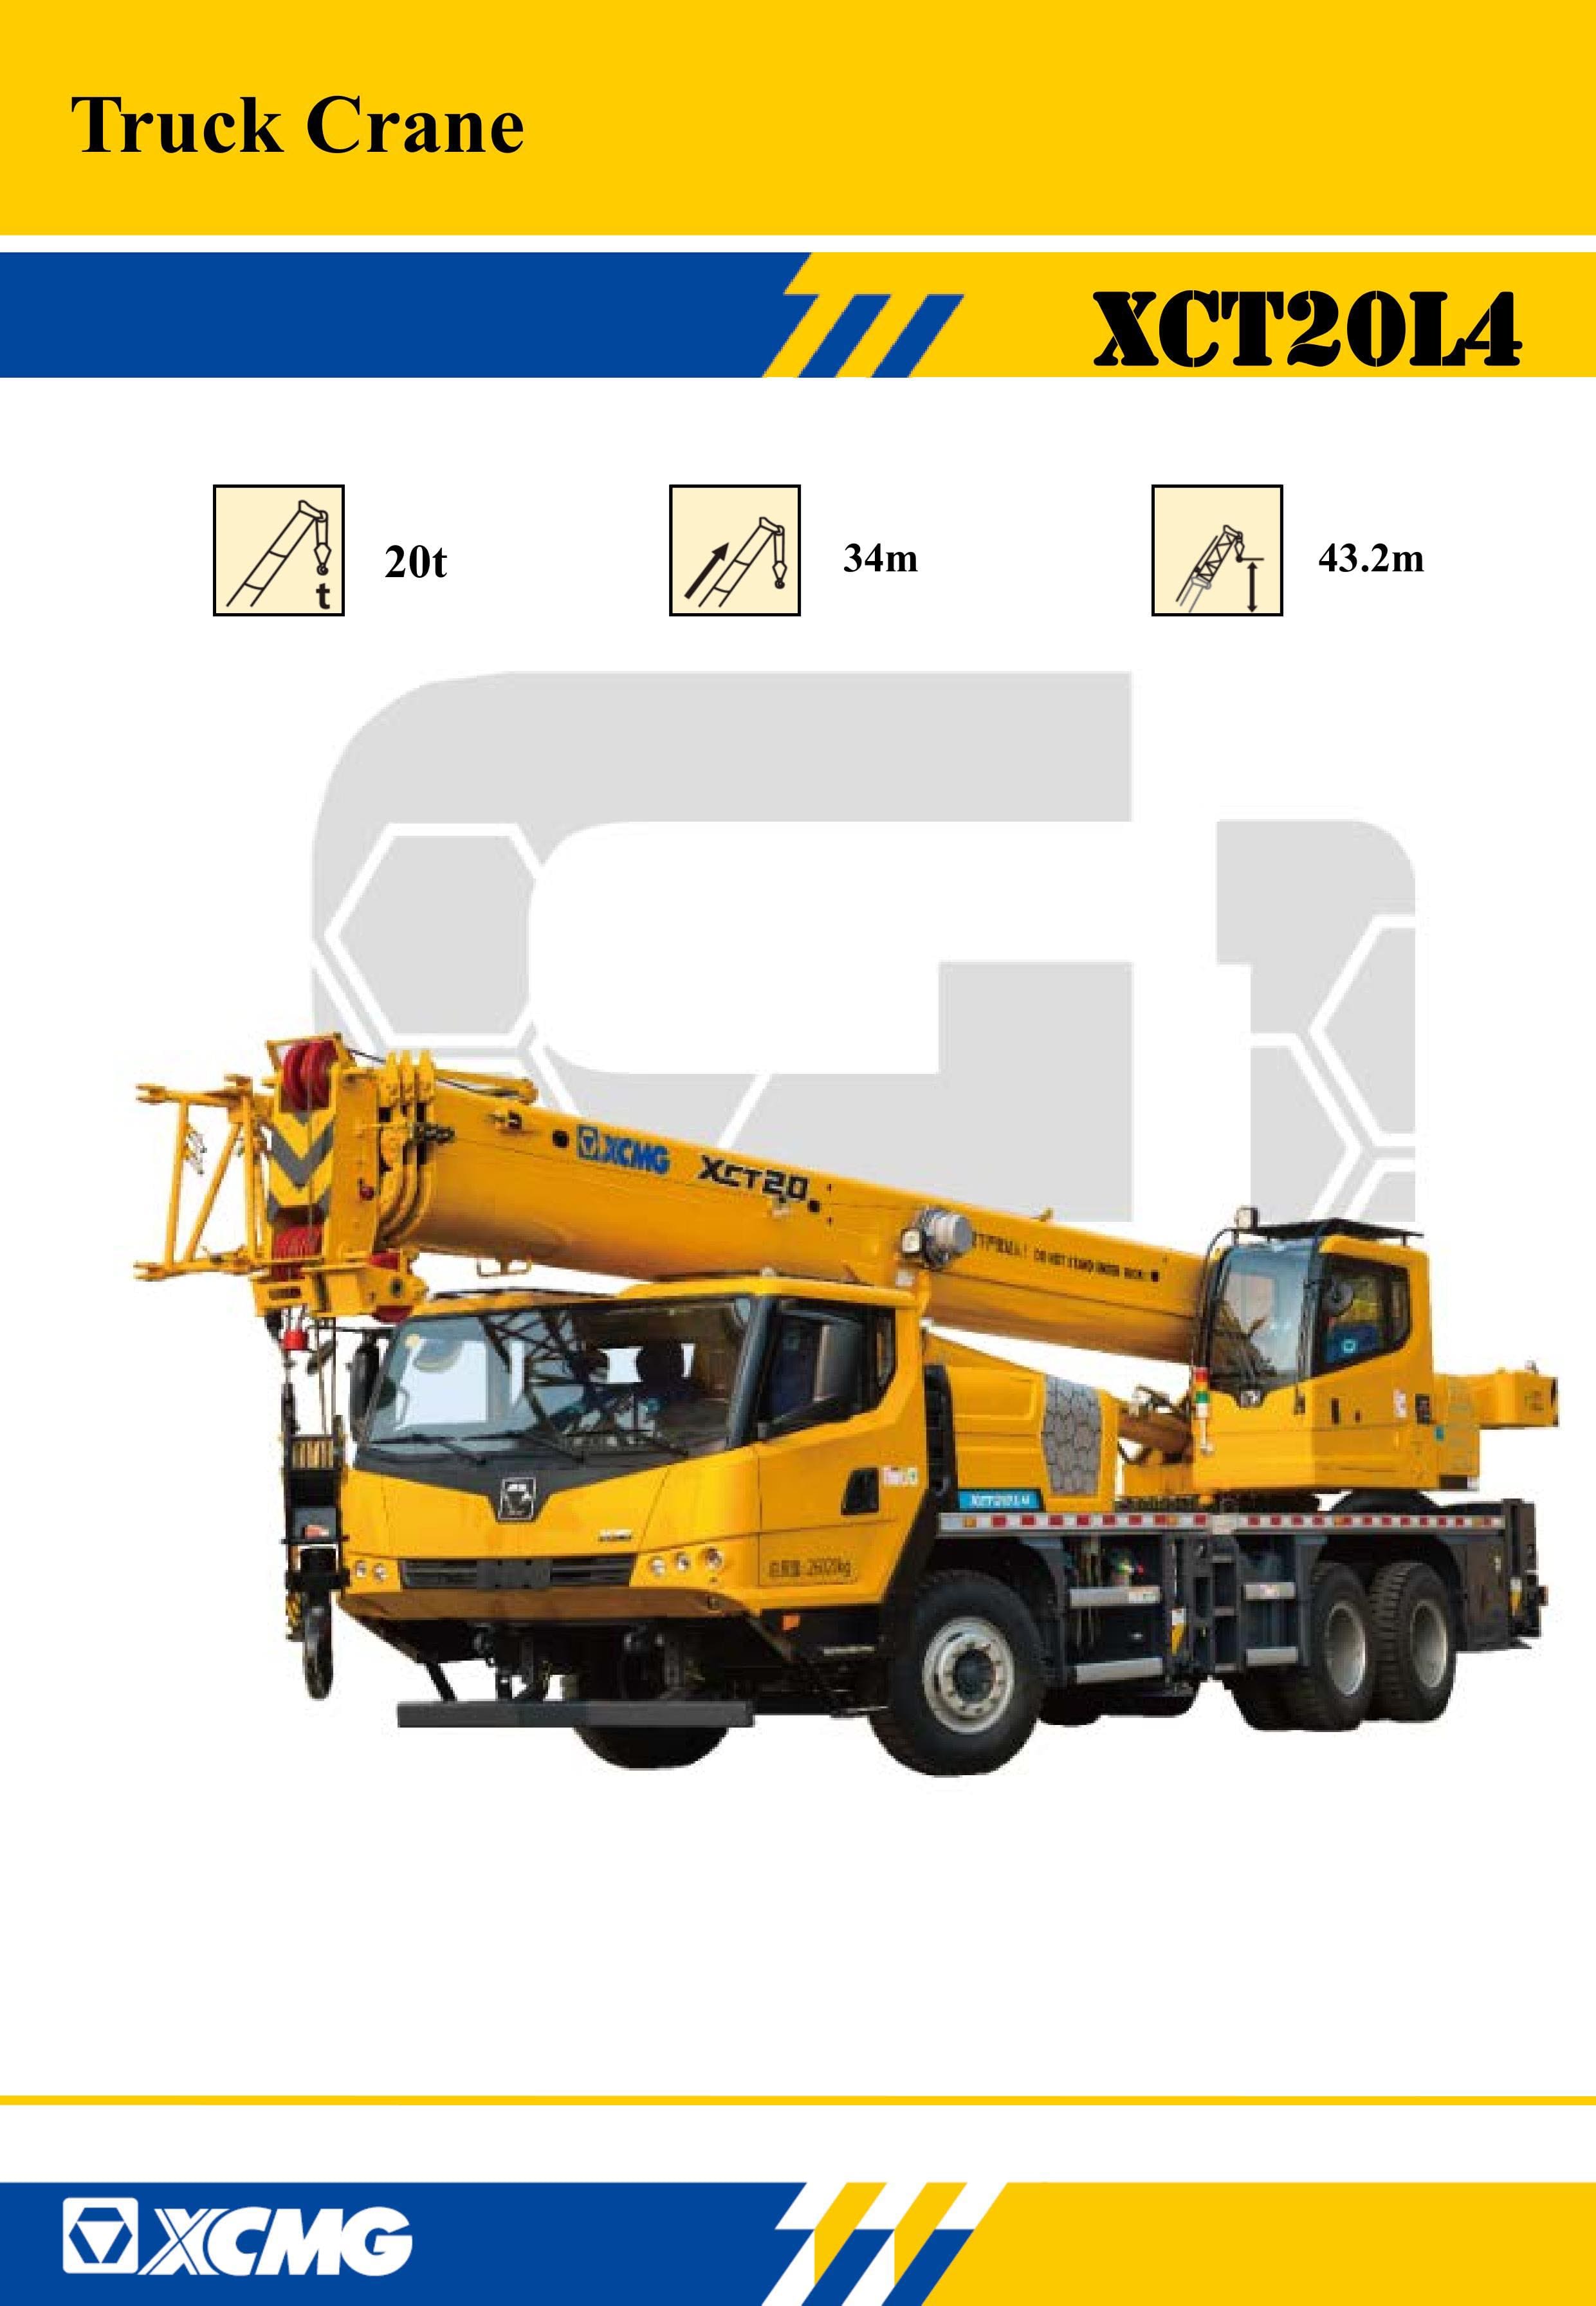 XCMG Official XCT20L4 Truck Crane for sale